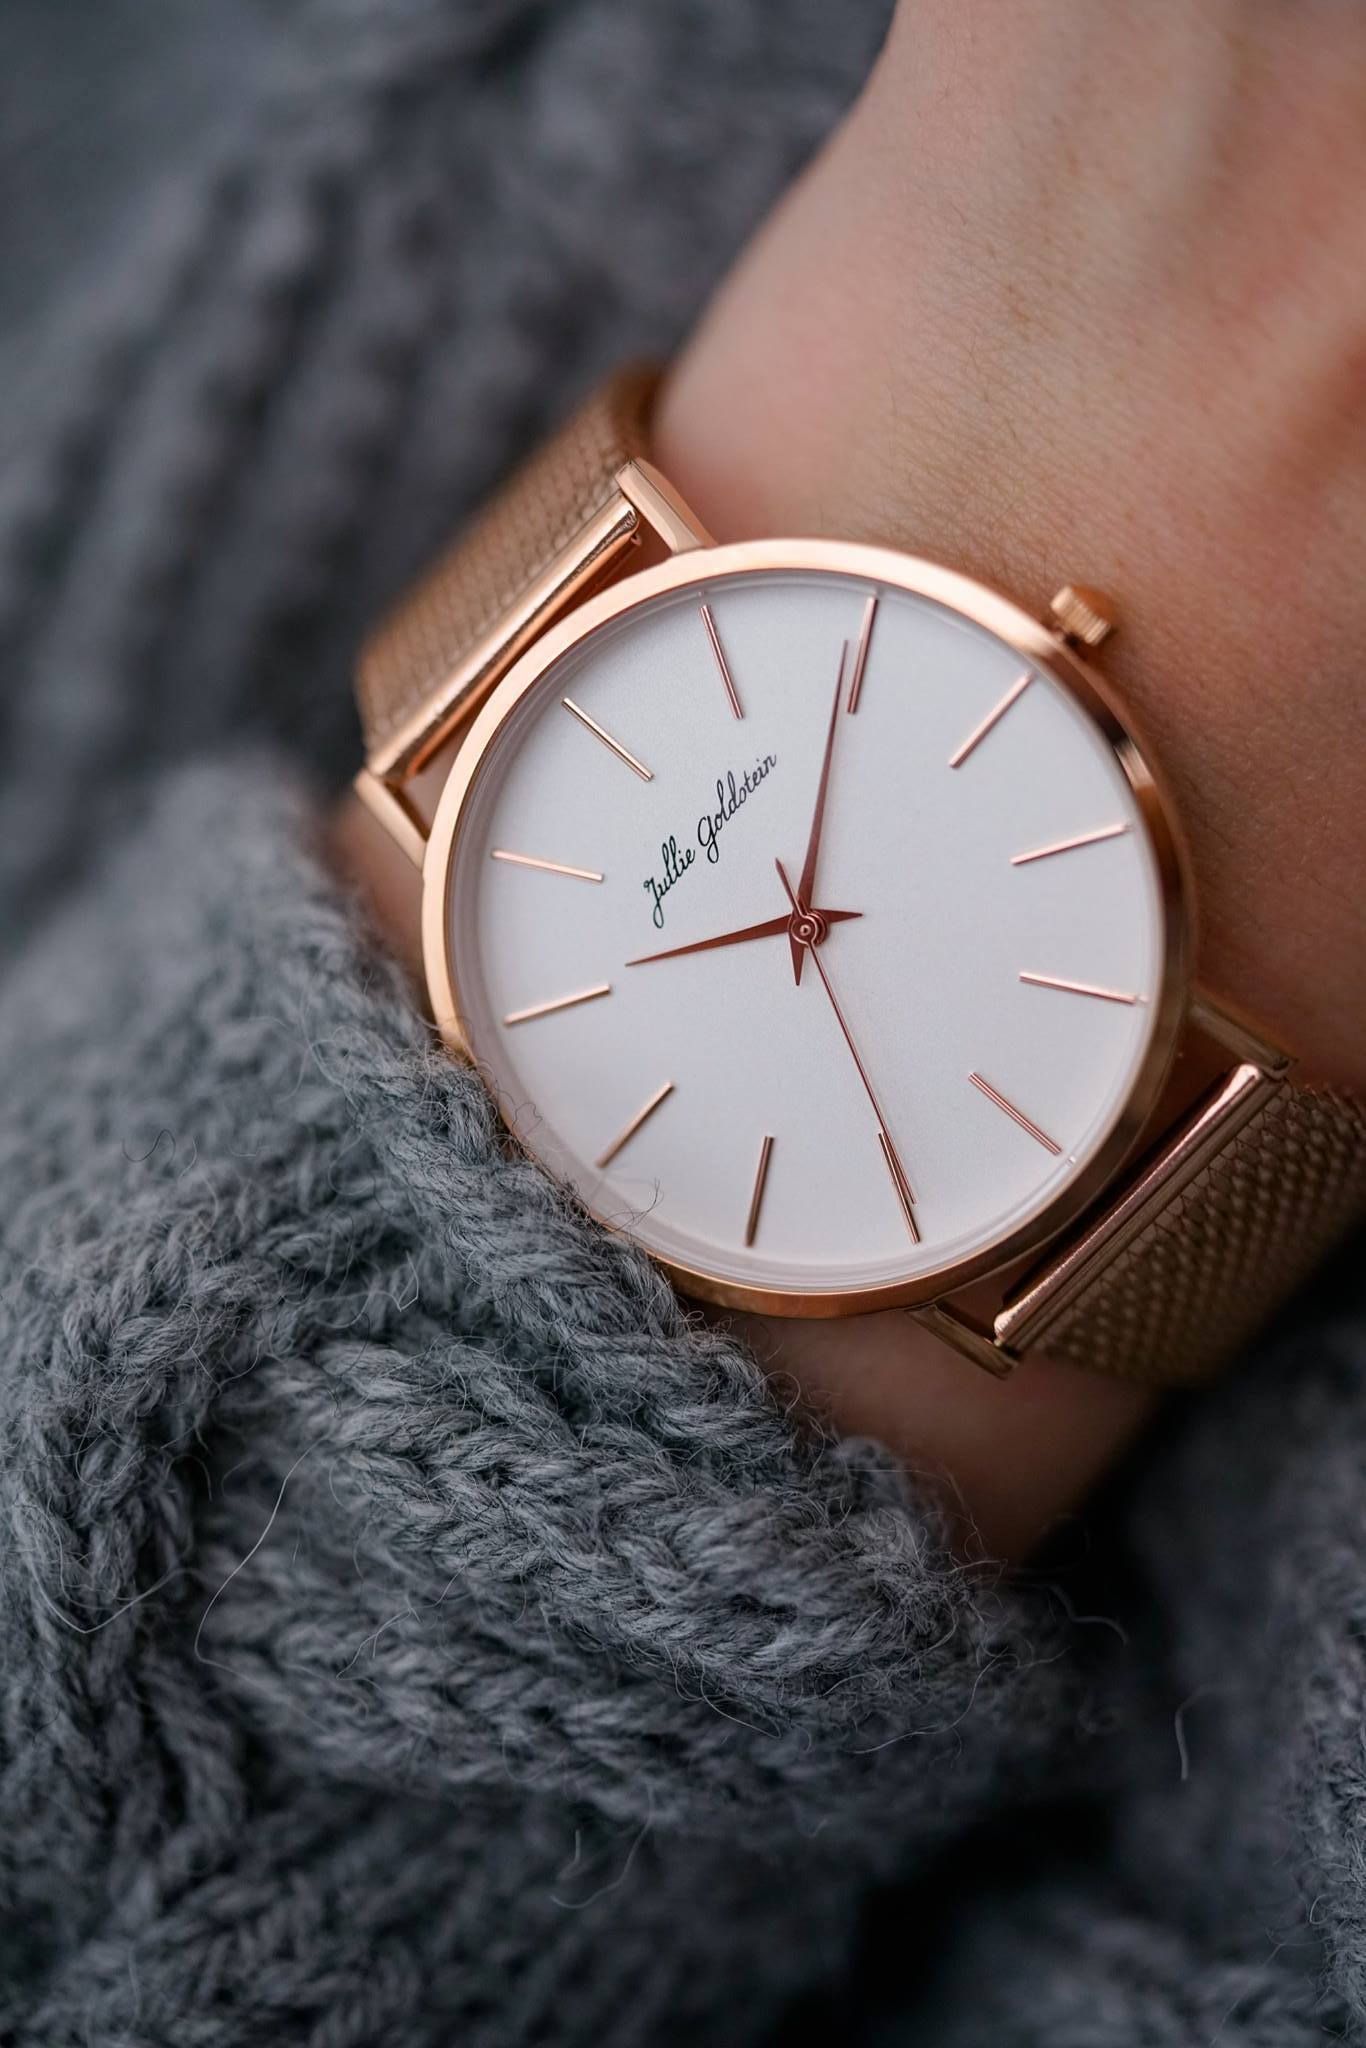 The Ultimate Guide to Women’s Watches:
Styles, Brands, and Trends